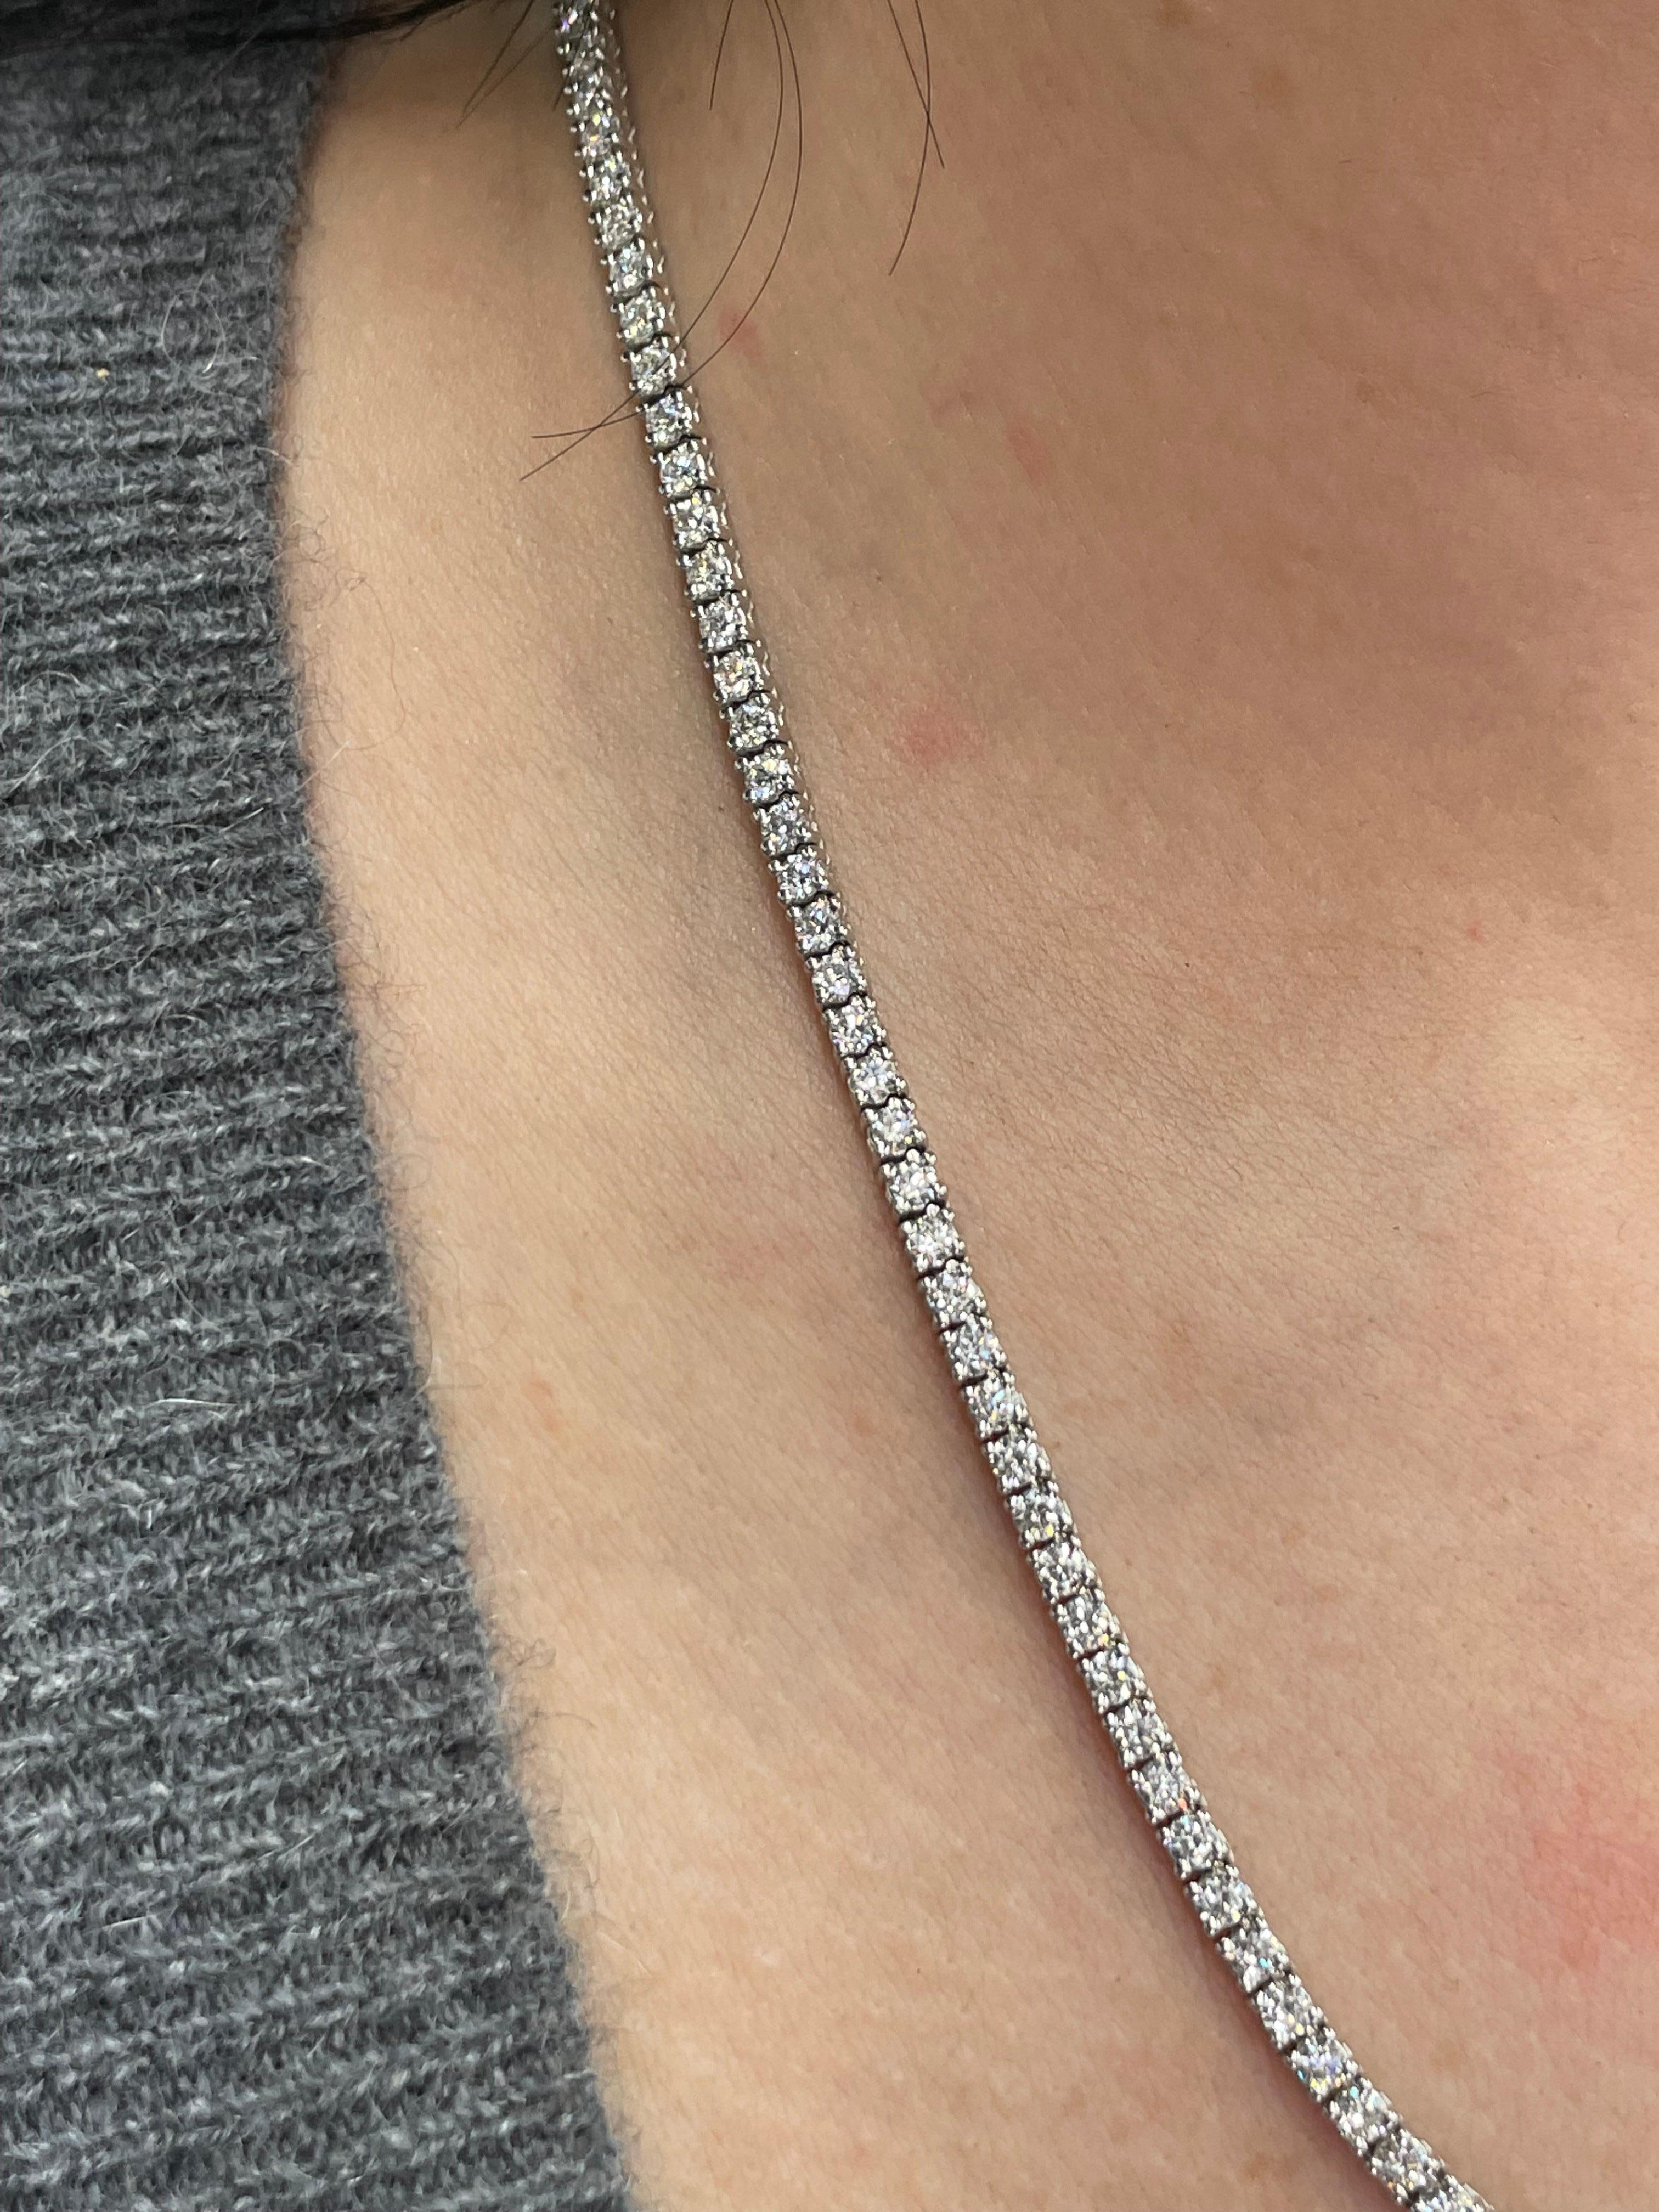 Diamond straight line necklace featuring 178 round brilliants weighing 9.07 Carats. Average Diamknds 0.05 pts
Color G-H
Clarity SI1-2

We manufacture Straight line and Riviere Necklaces
Sizes Range 1 -26 Carats
Can customize any length, carat size,